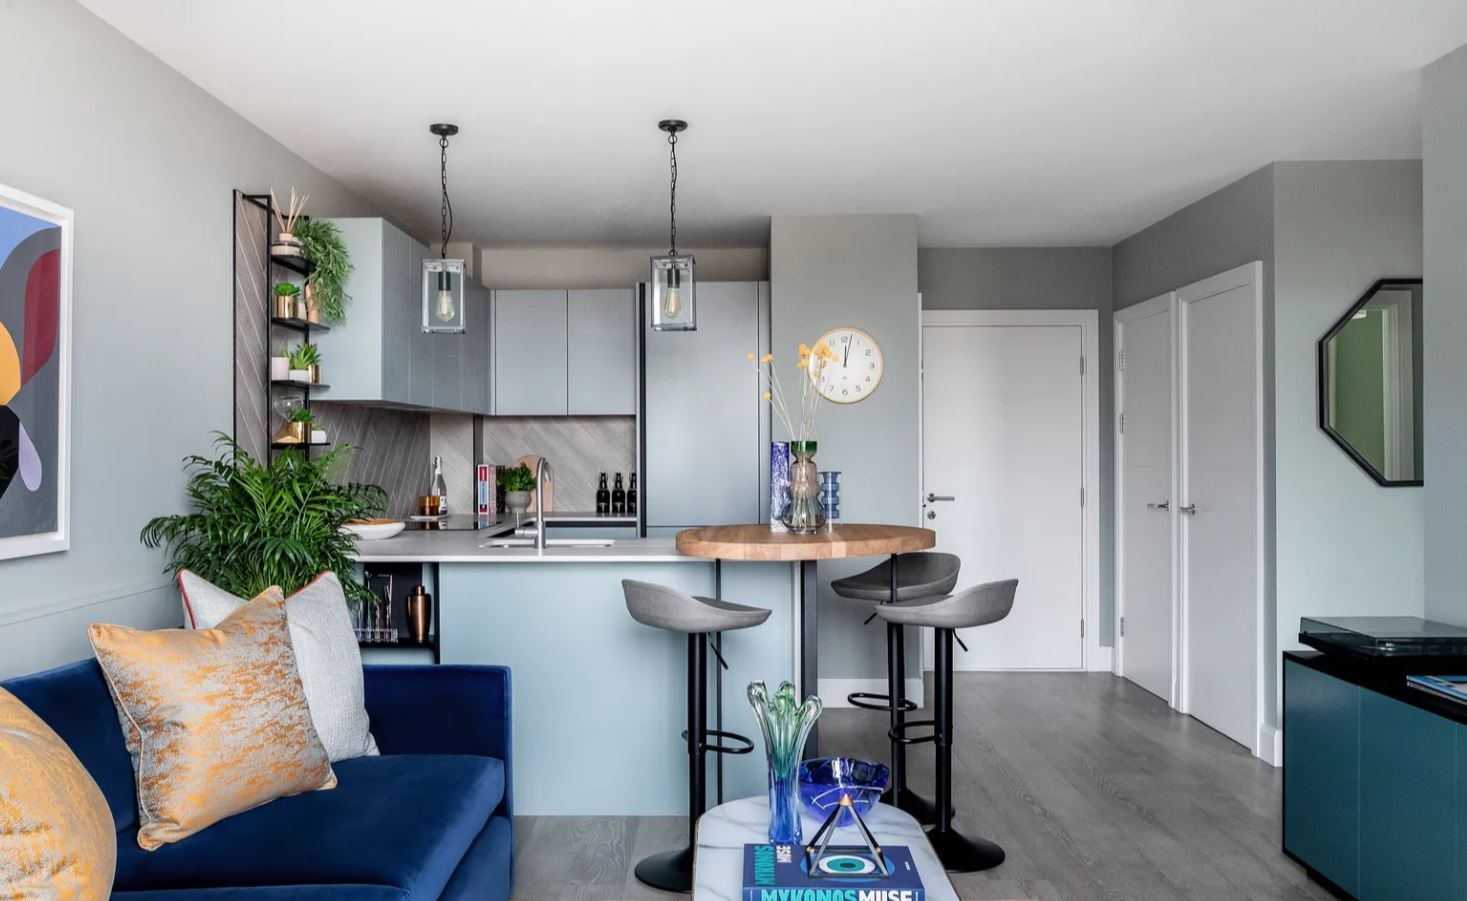 All photos: Zoopla